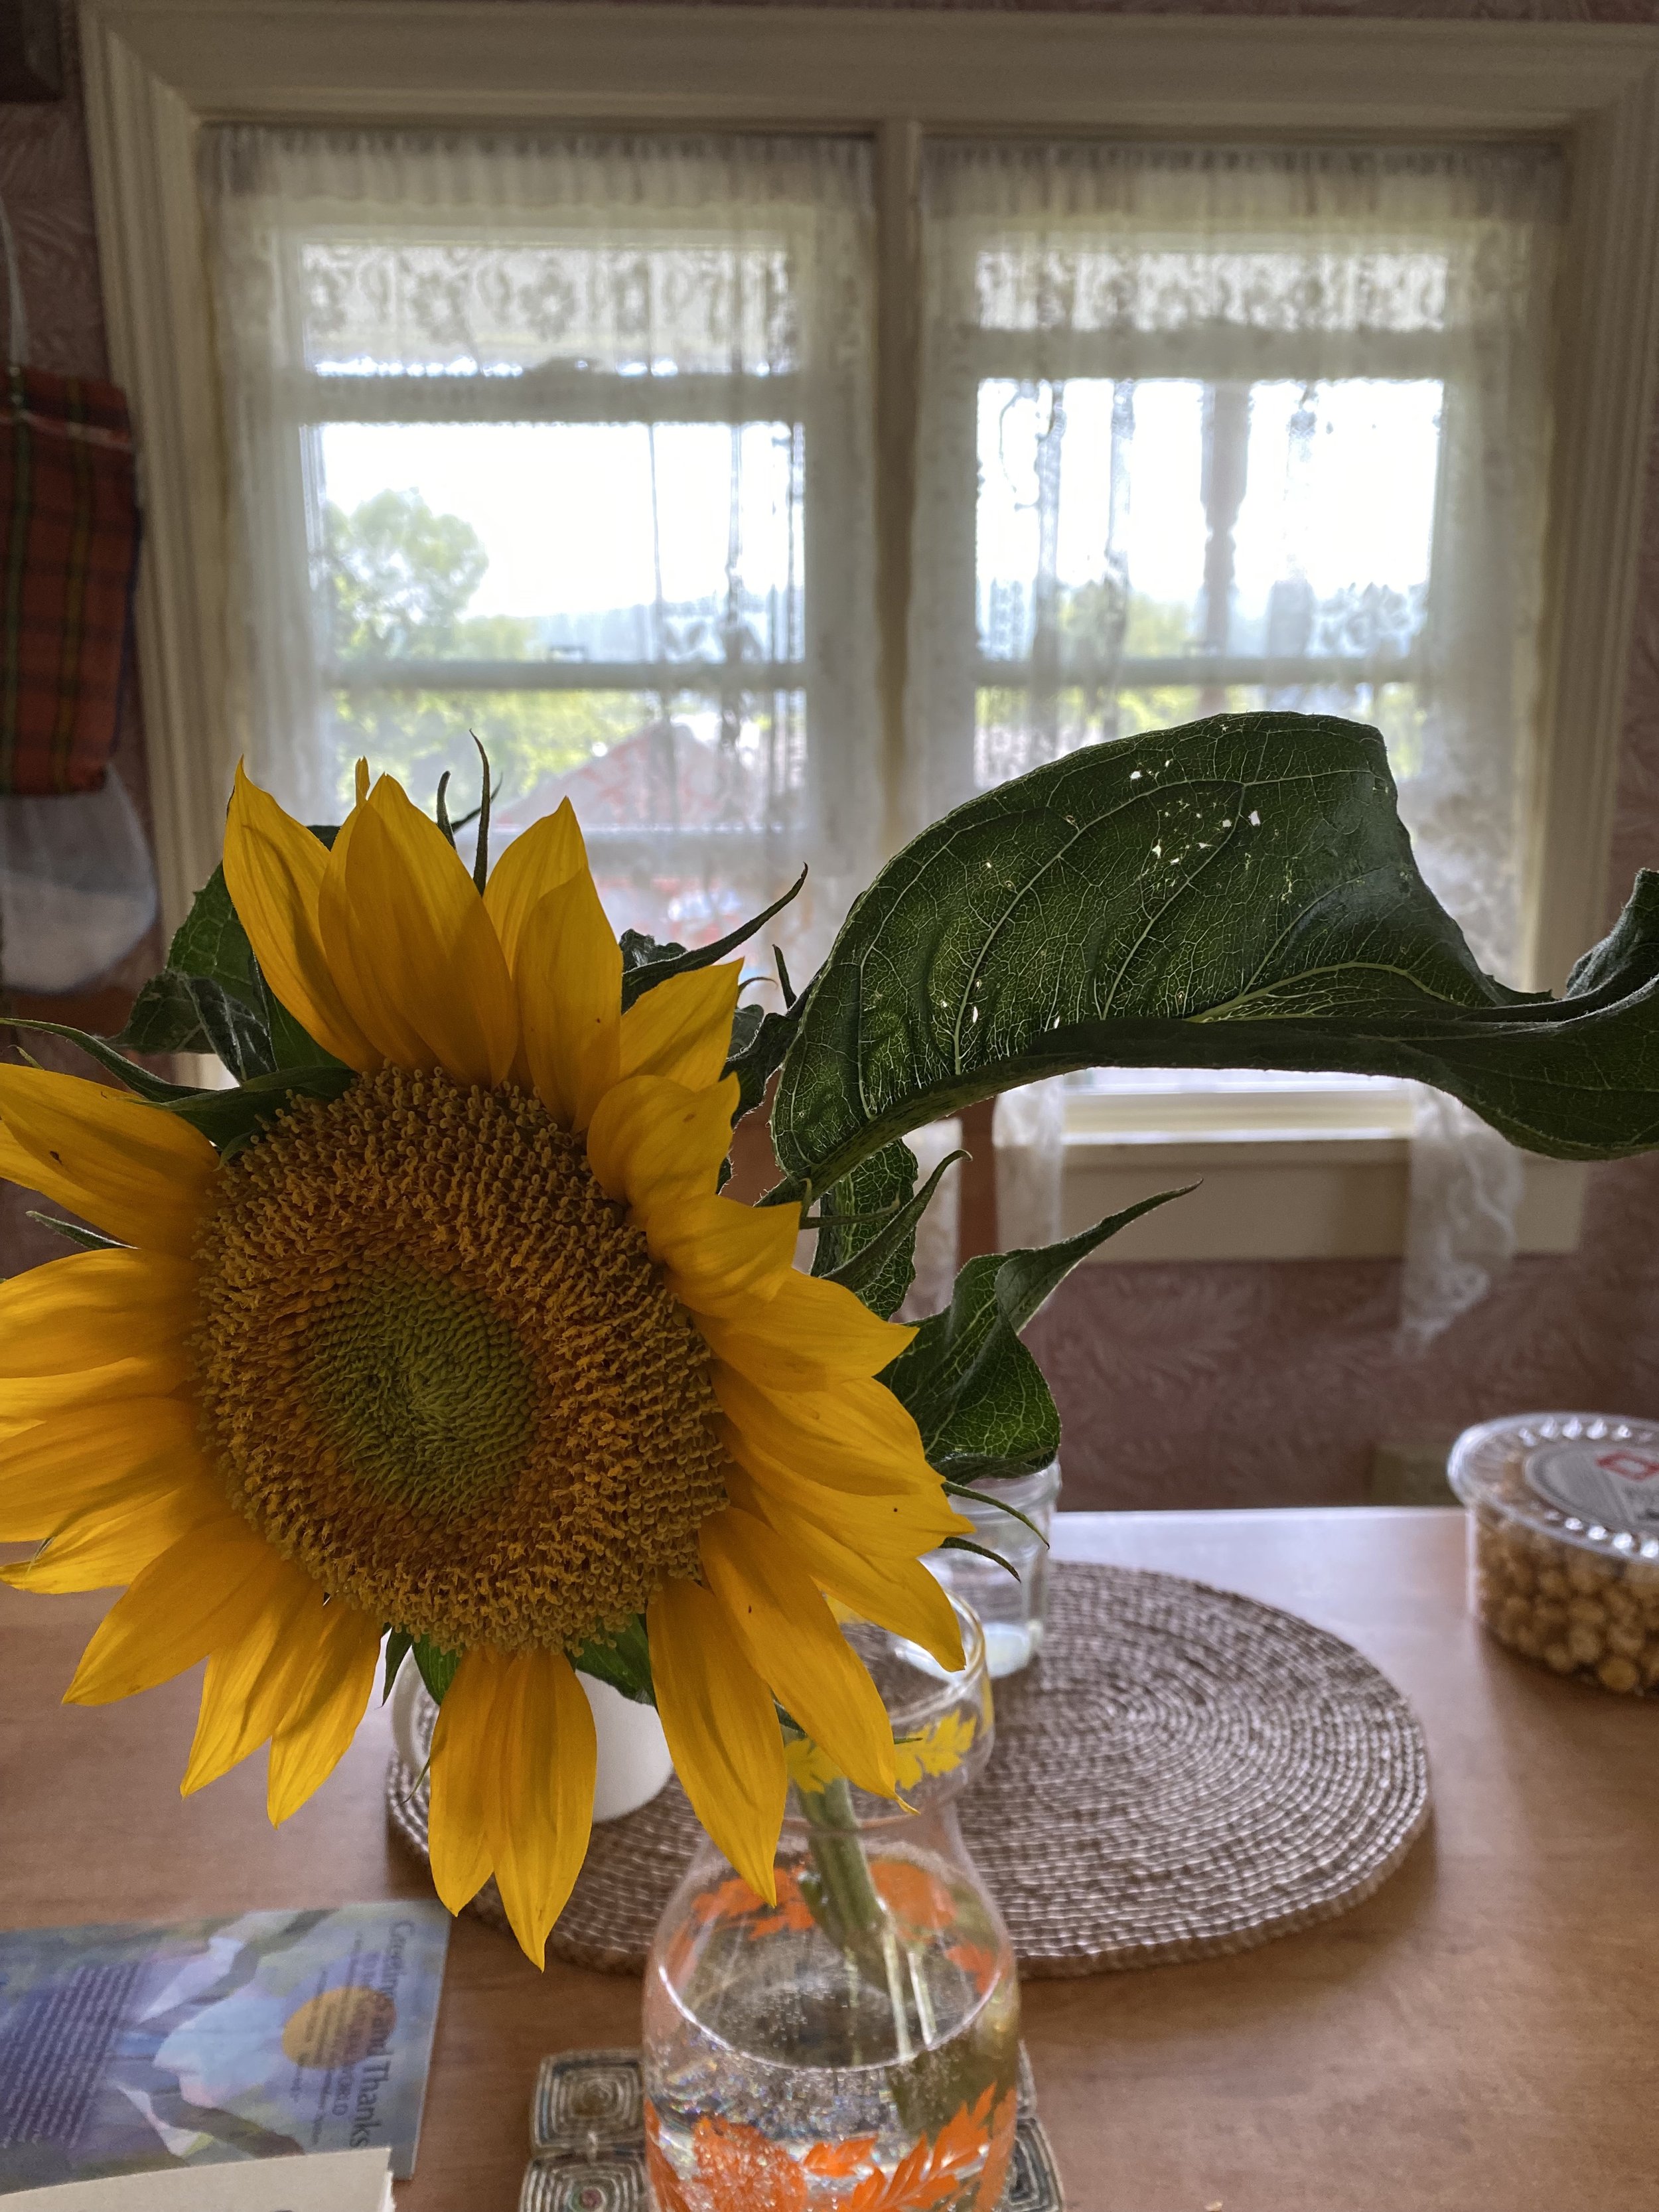 Sunflower and view from the farmhouse. Photo by me.